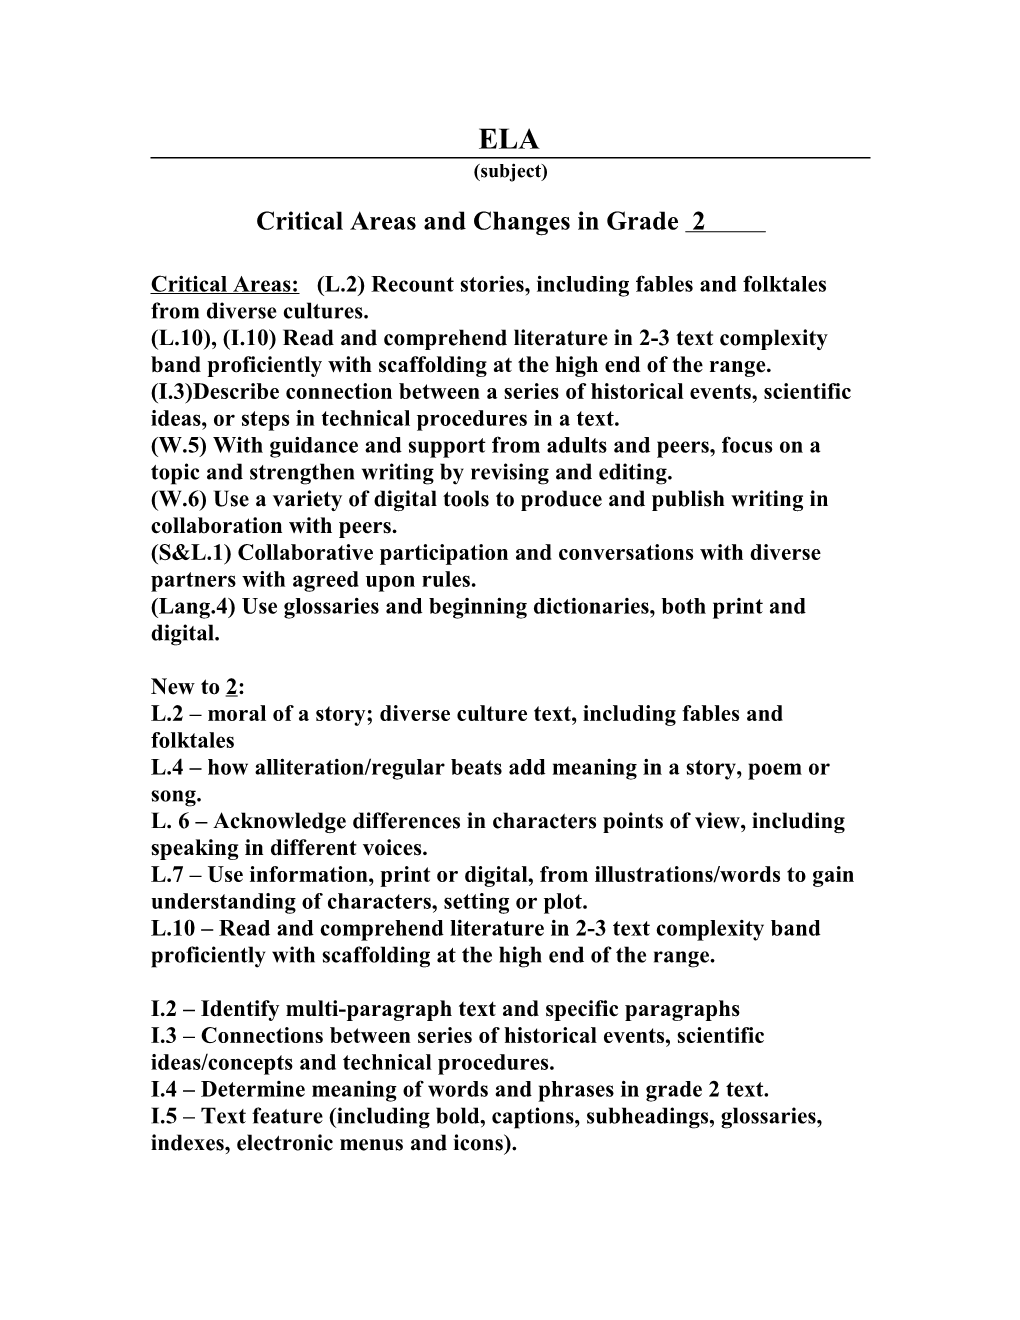 Critical Areas: (L.2)Recount Stories, Including Fables and Folktales from Diverse Cultures